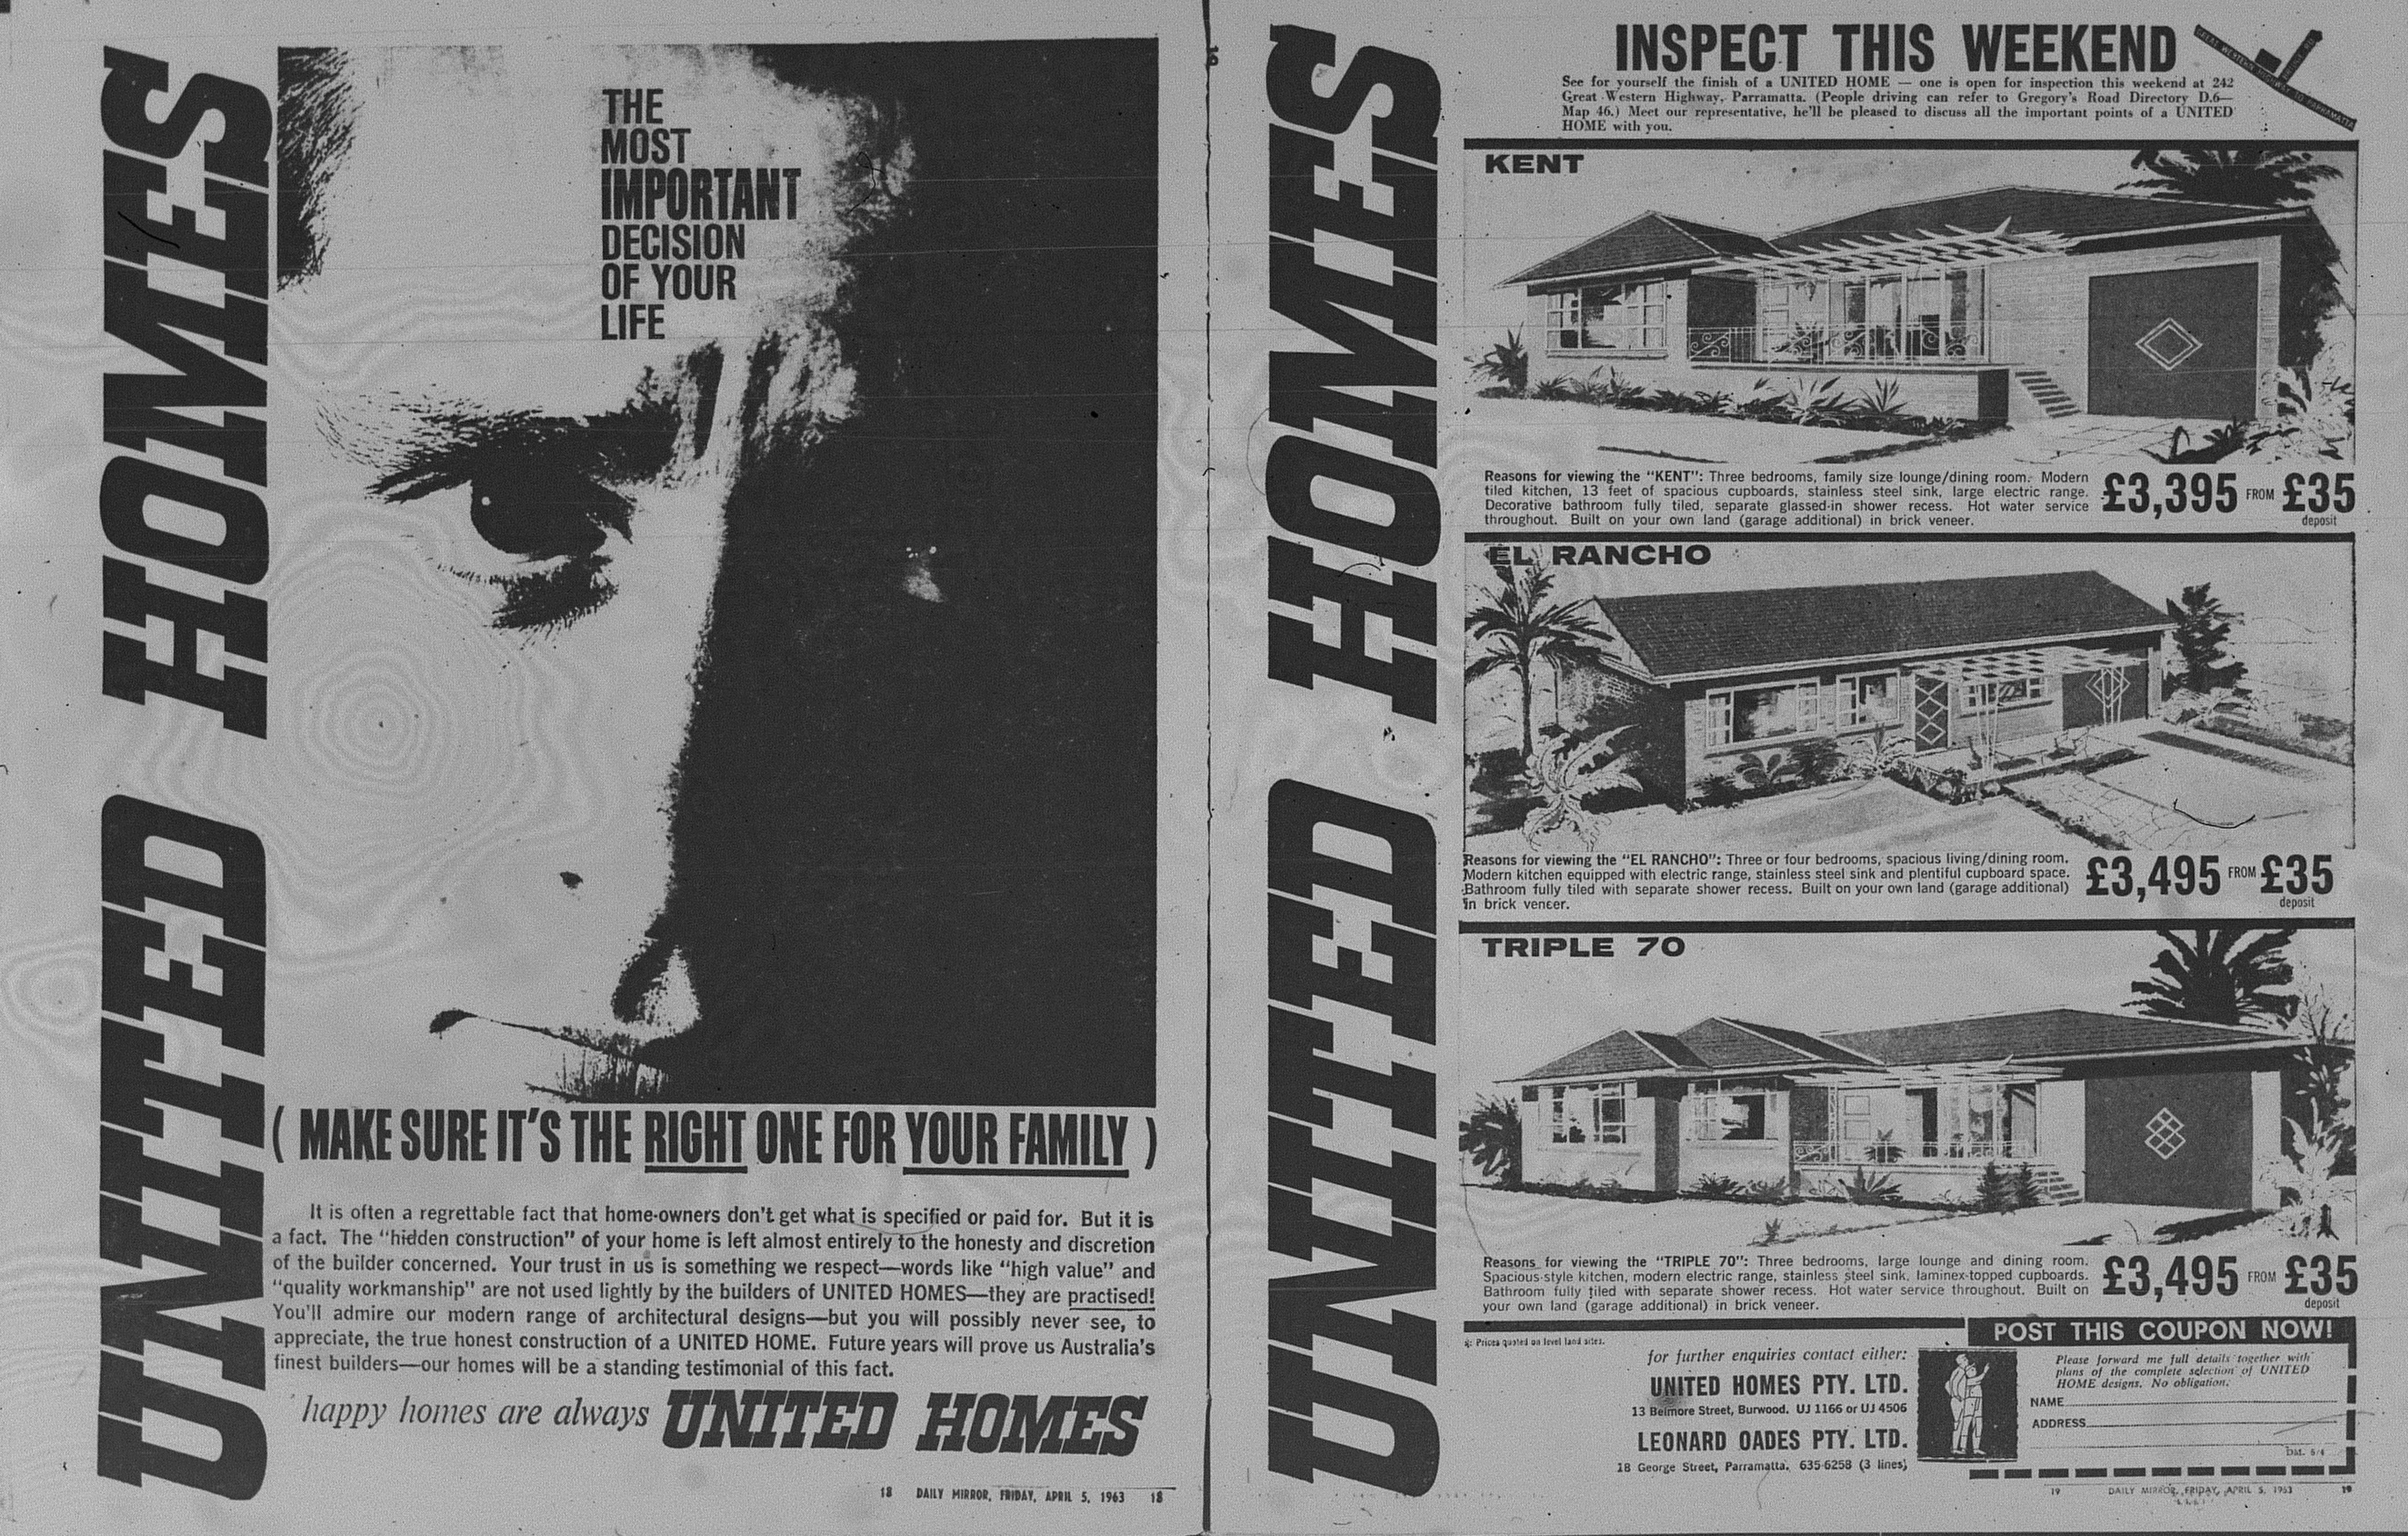 United Homes Ad April 5 1963 daily mirror 18-19